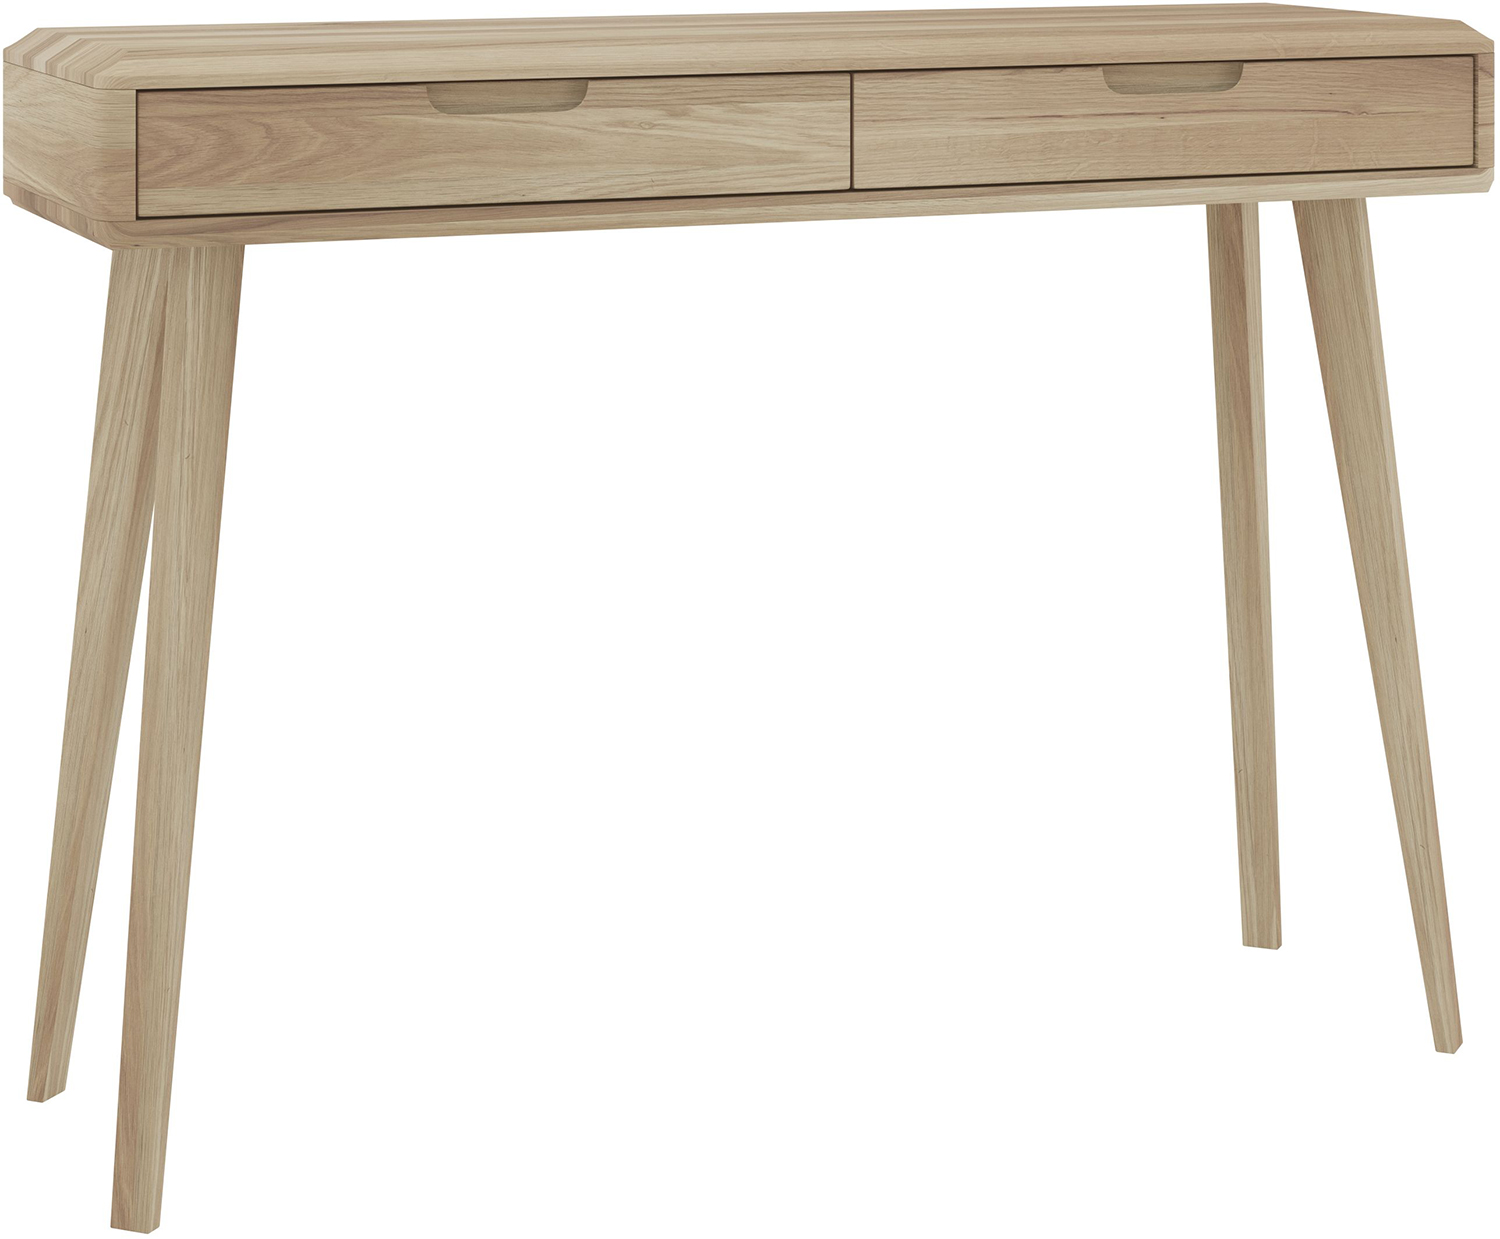 Bell & Stocchero Como 2 Drawer Console Table